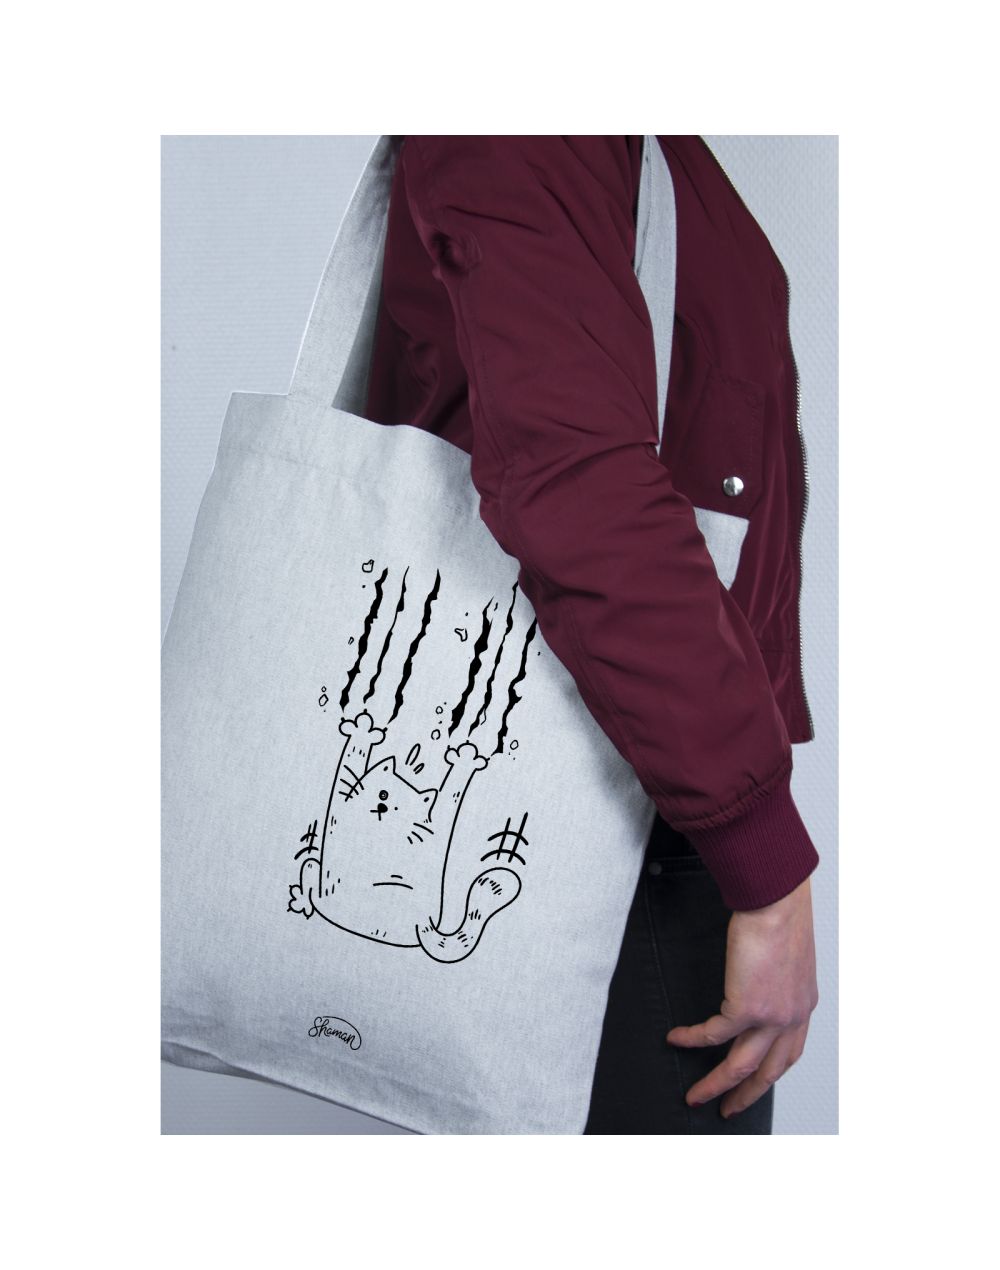 Tote Bag "Chat griffe"